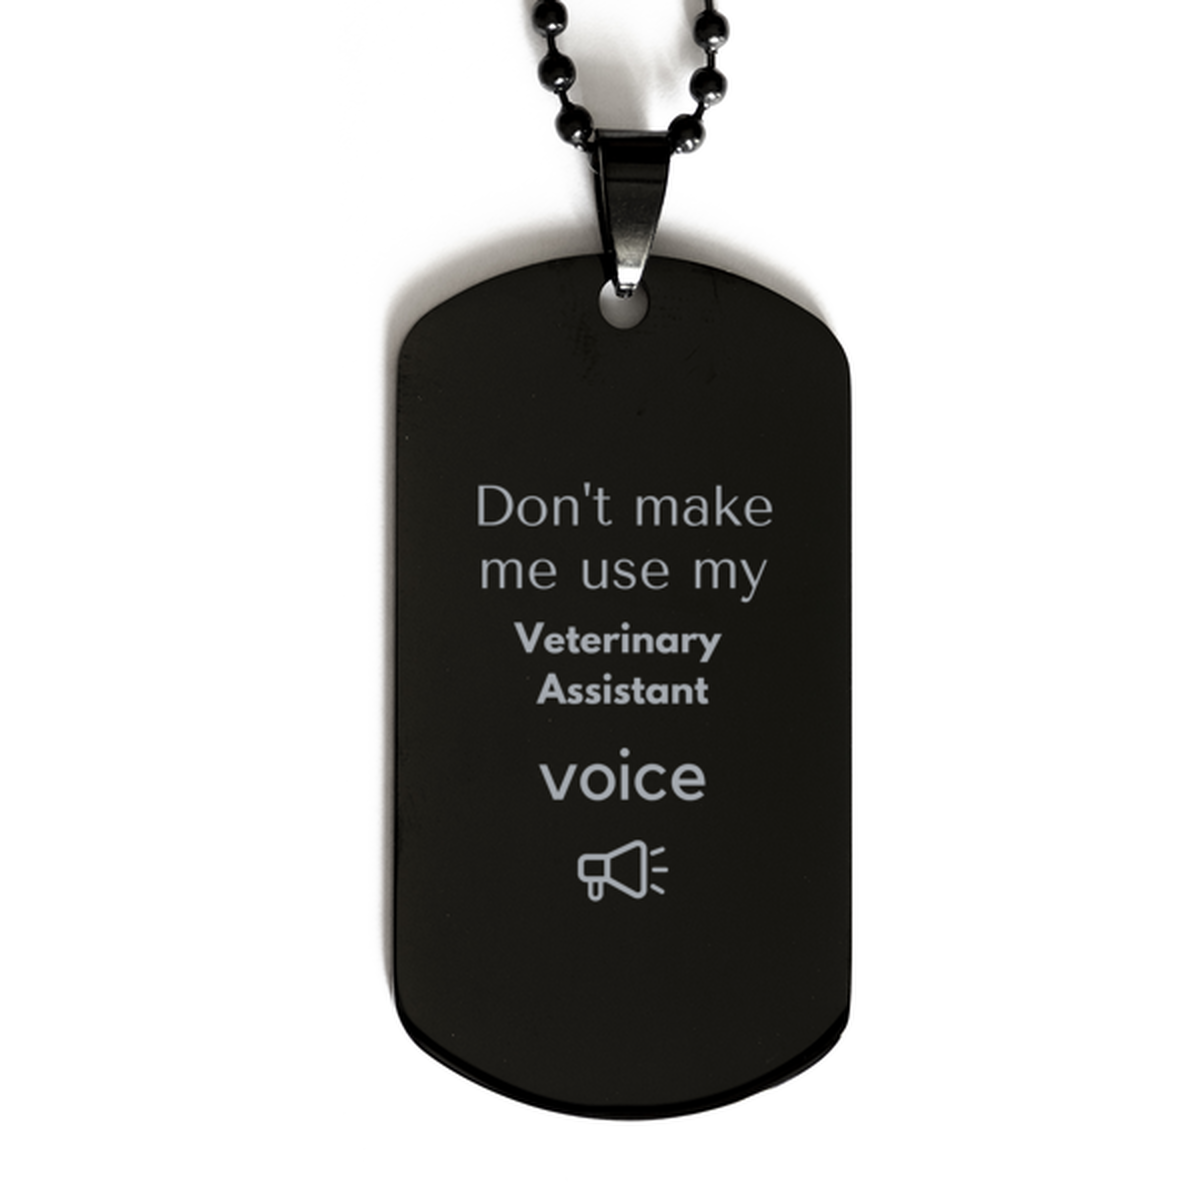 Don't make me use my Veterinary Assistant voice, Sarcasm Veterinary Assistant Gifts, Christmas Veterinary Assistant Black Dog Tag Birthday Unique Gifts For Veterinary Assistant Coworkers, Men, Women, Colleague, Friends